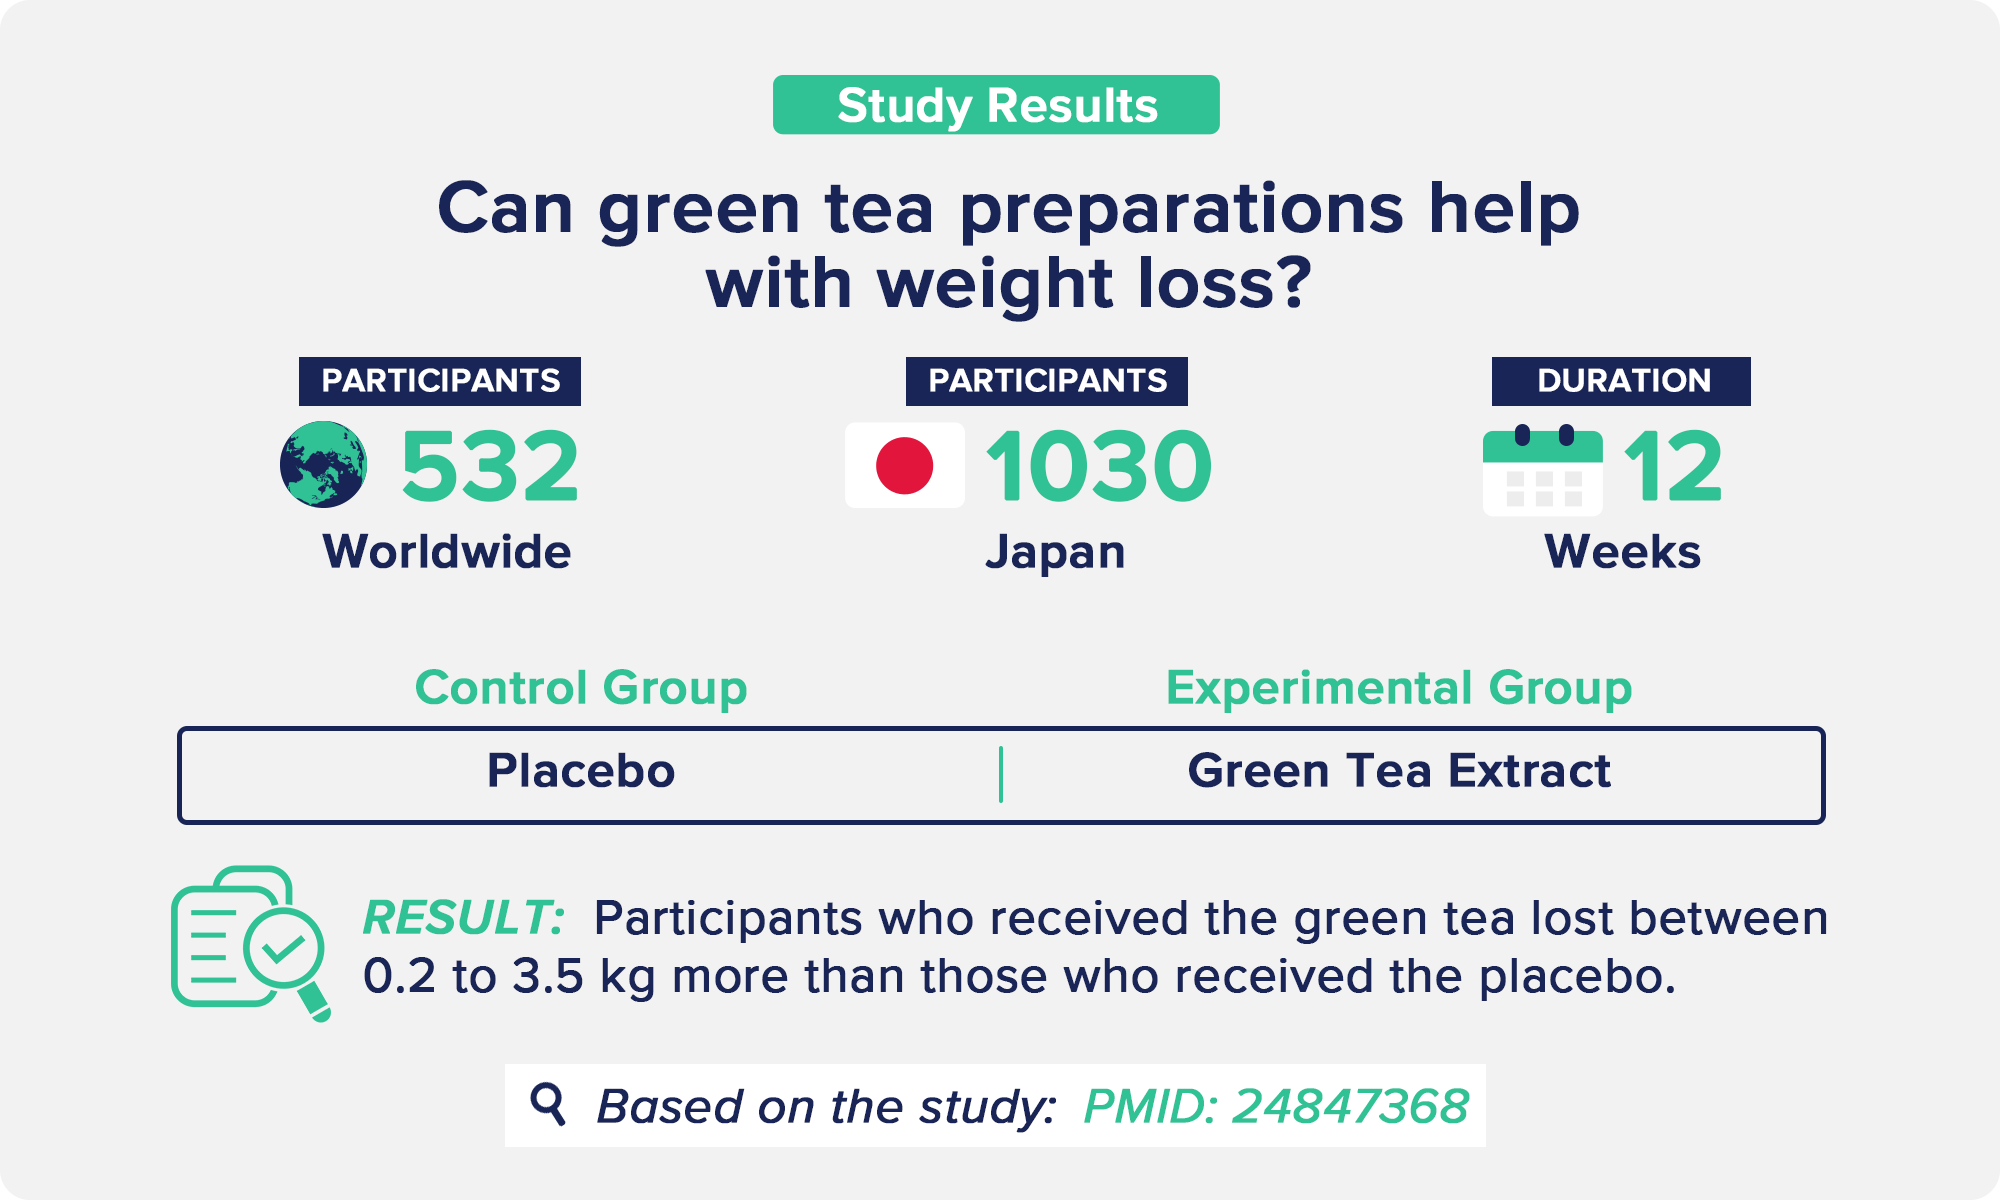 Can green tea preparations help with weight loss